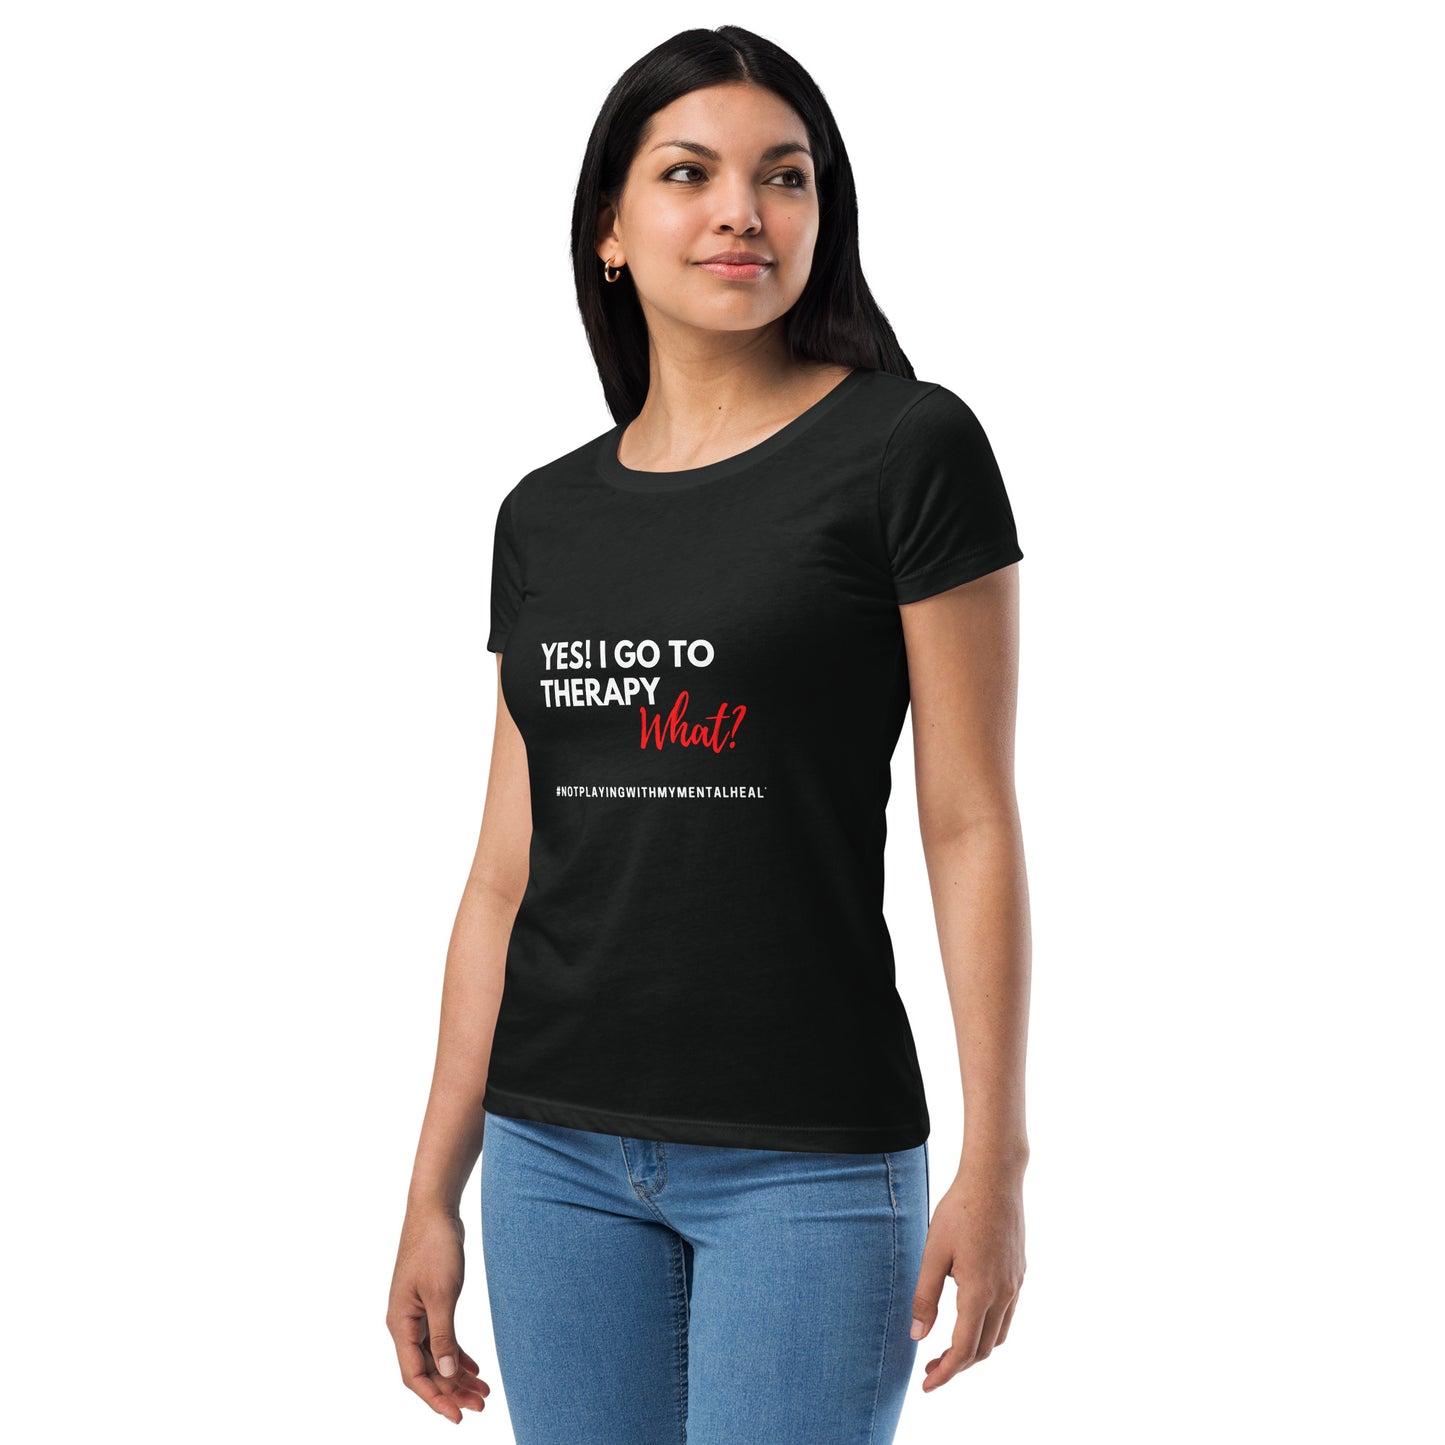 I Go to Therapy Women's T-shirt